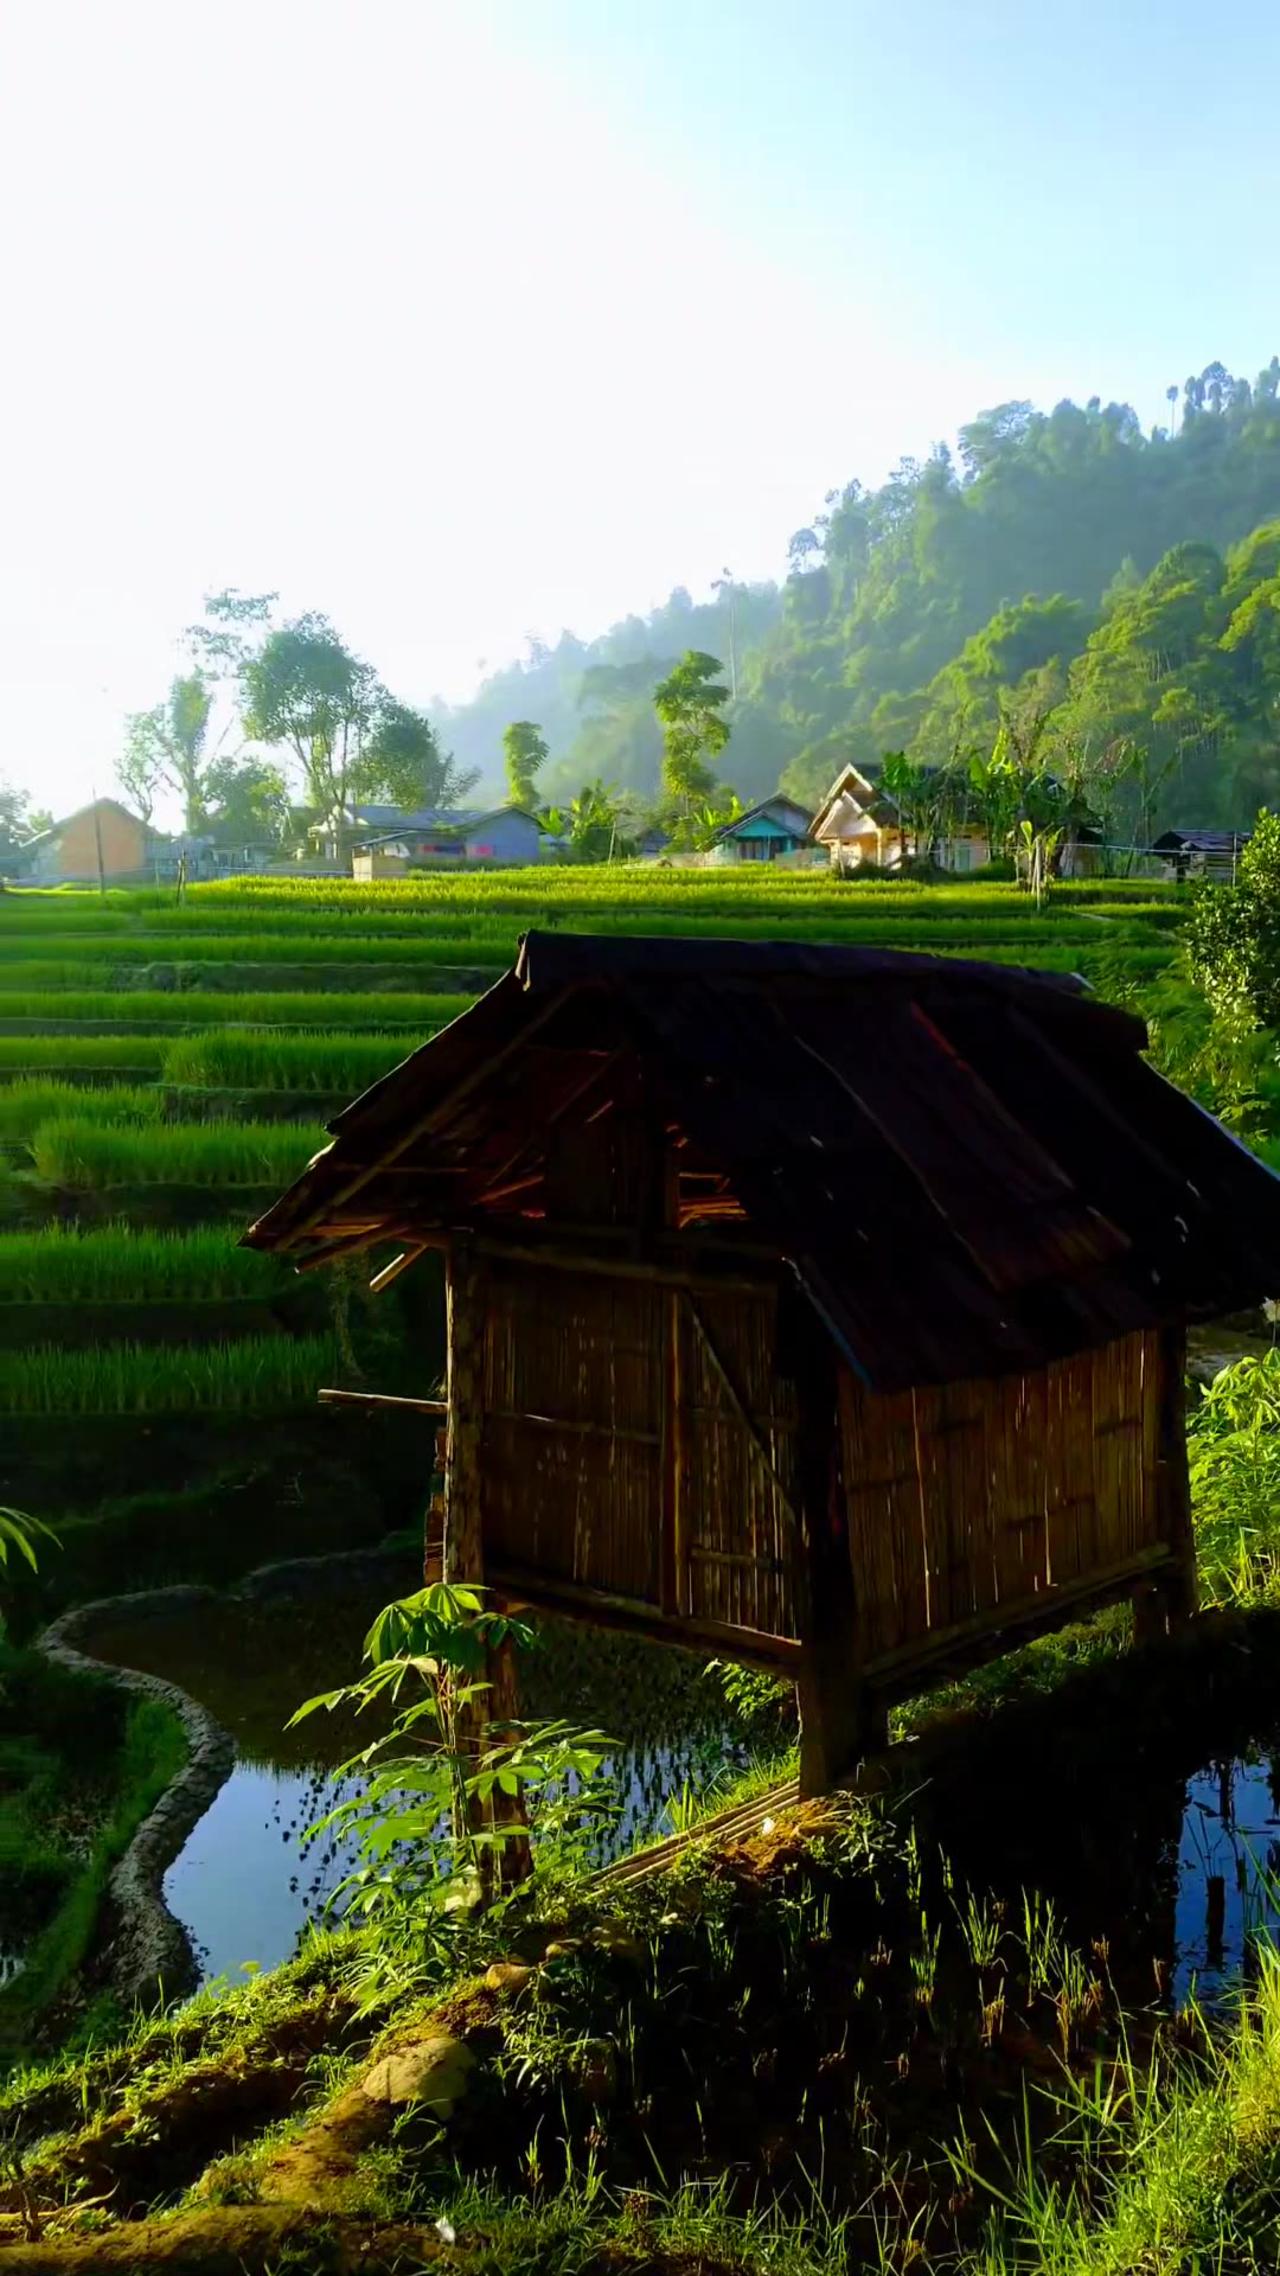 the view of the rice fields is very soothing